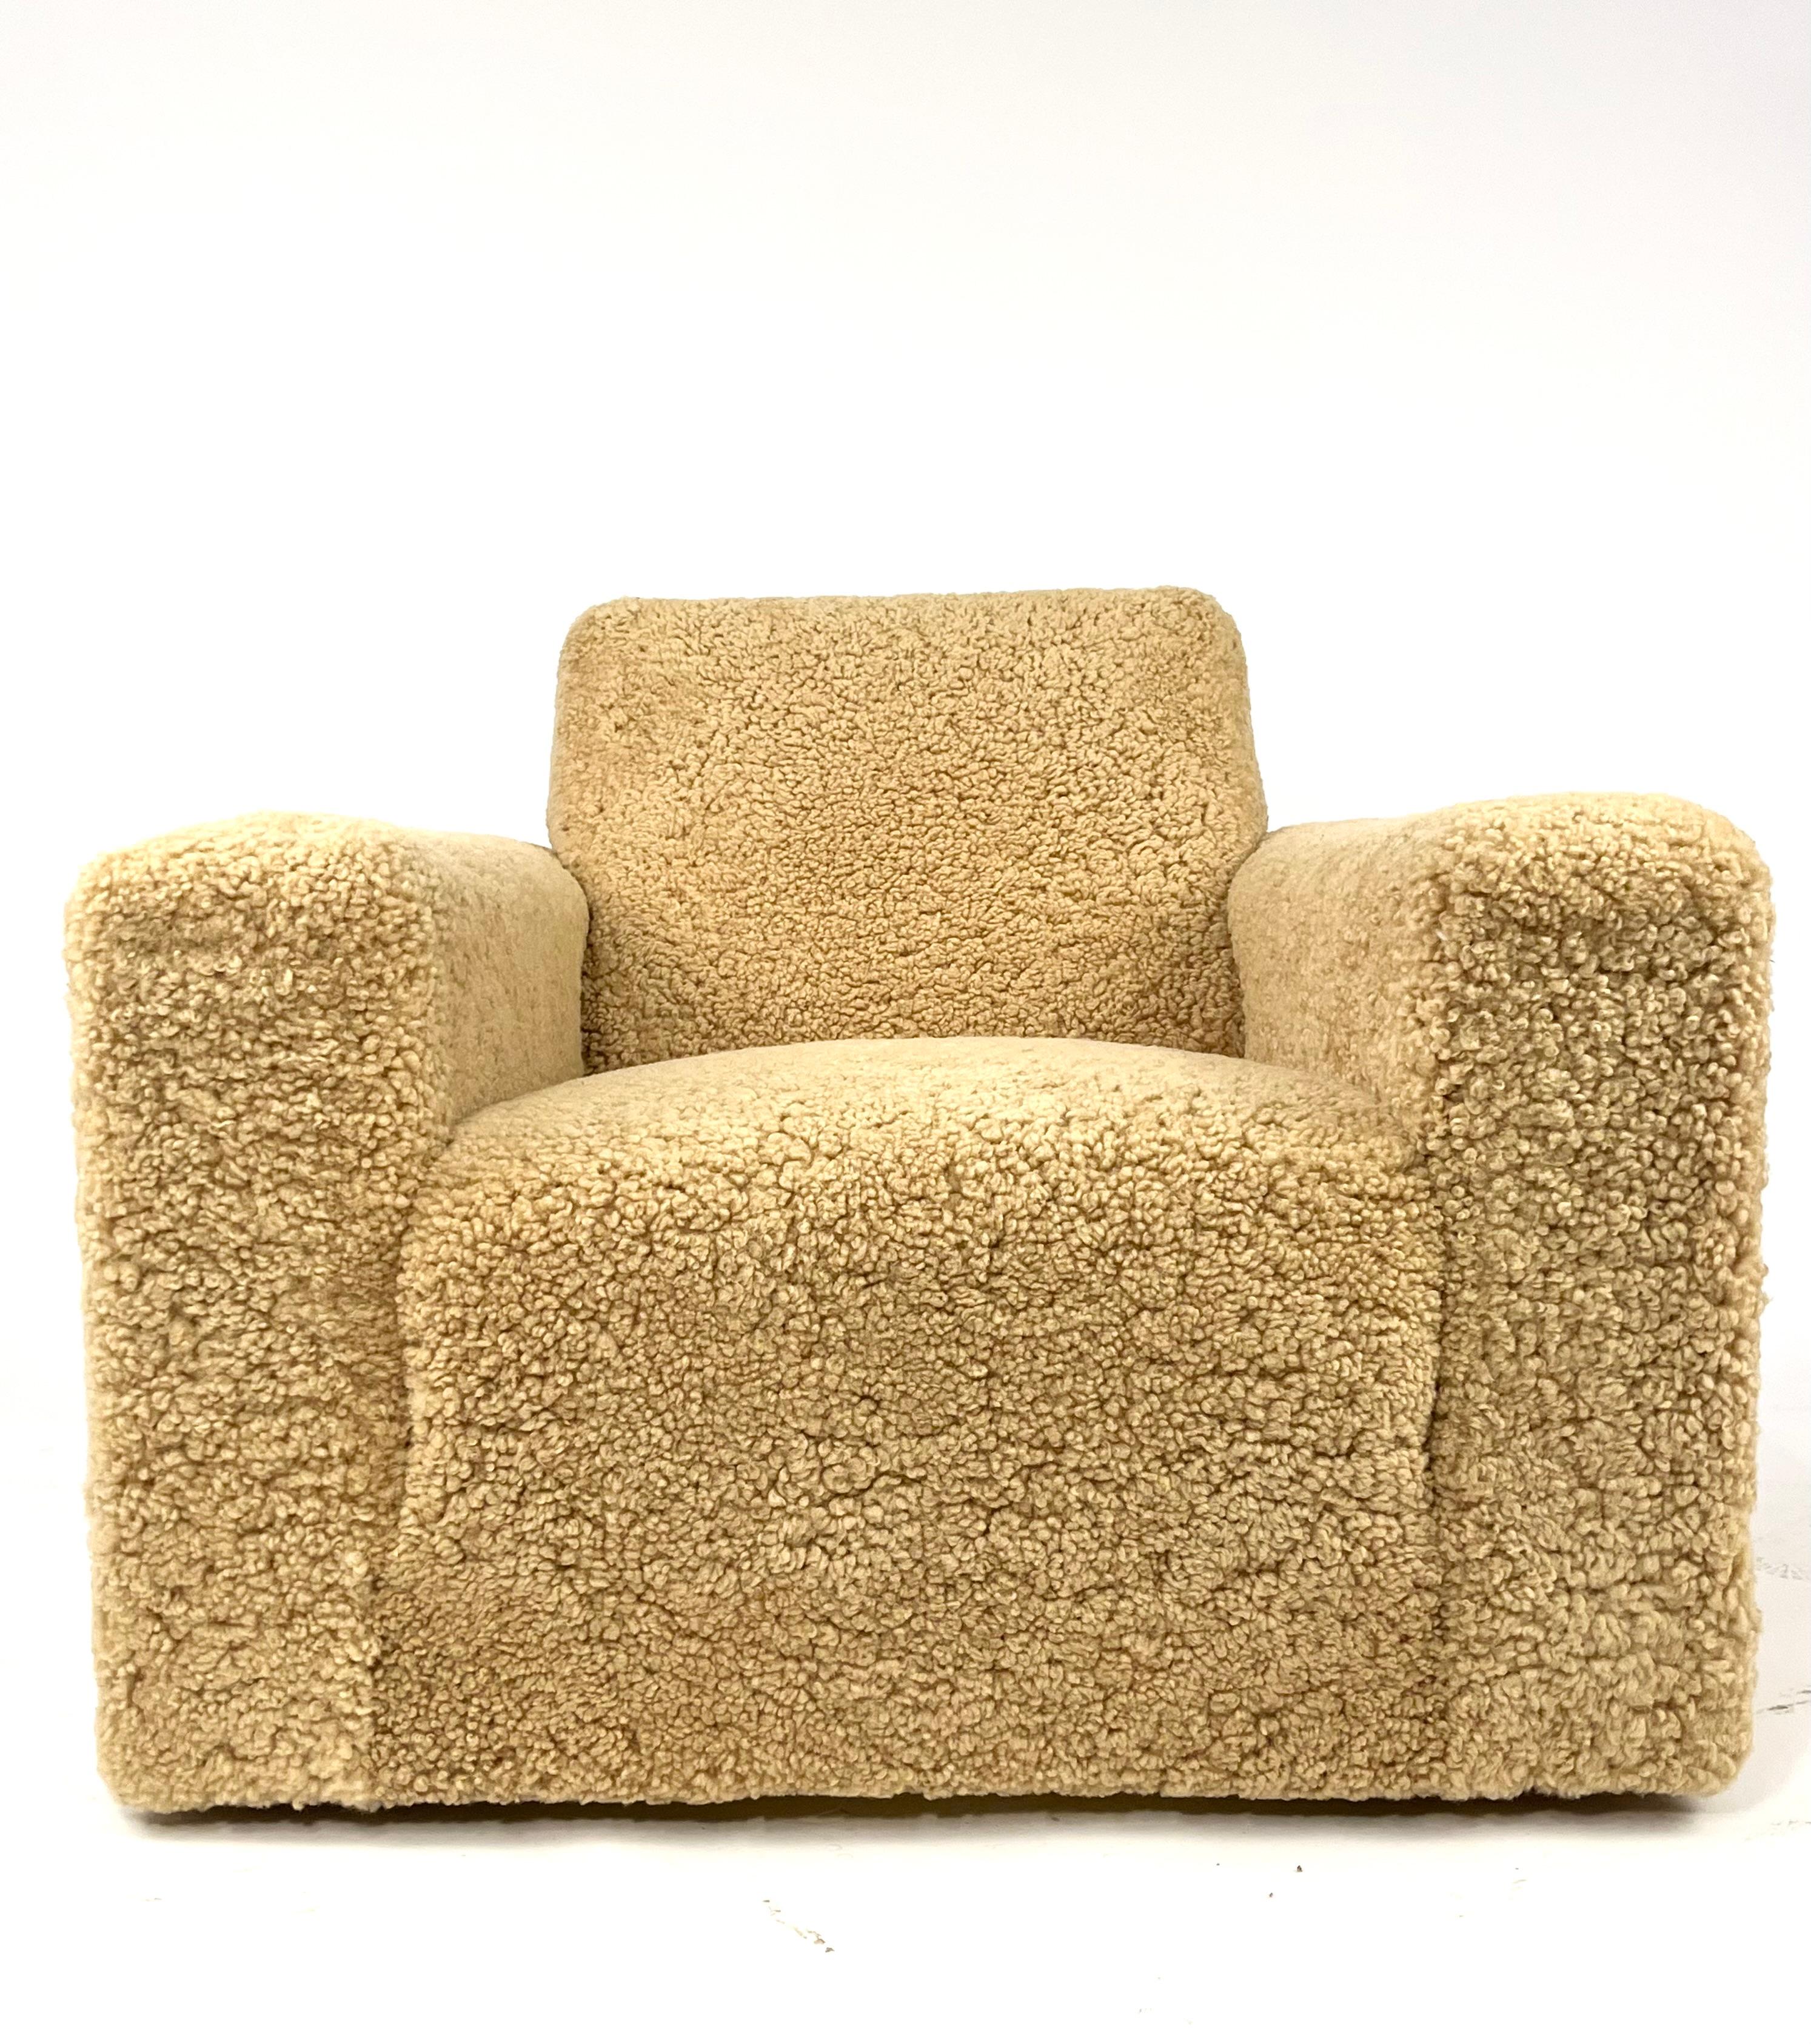 Wool Shearling lounge chair, Sweden. For Sale